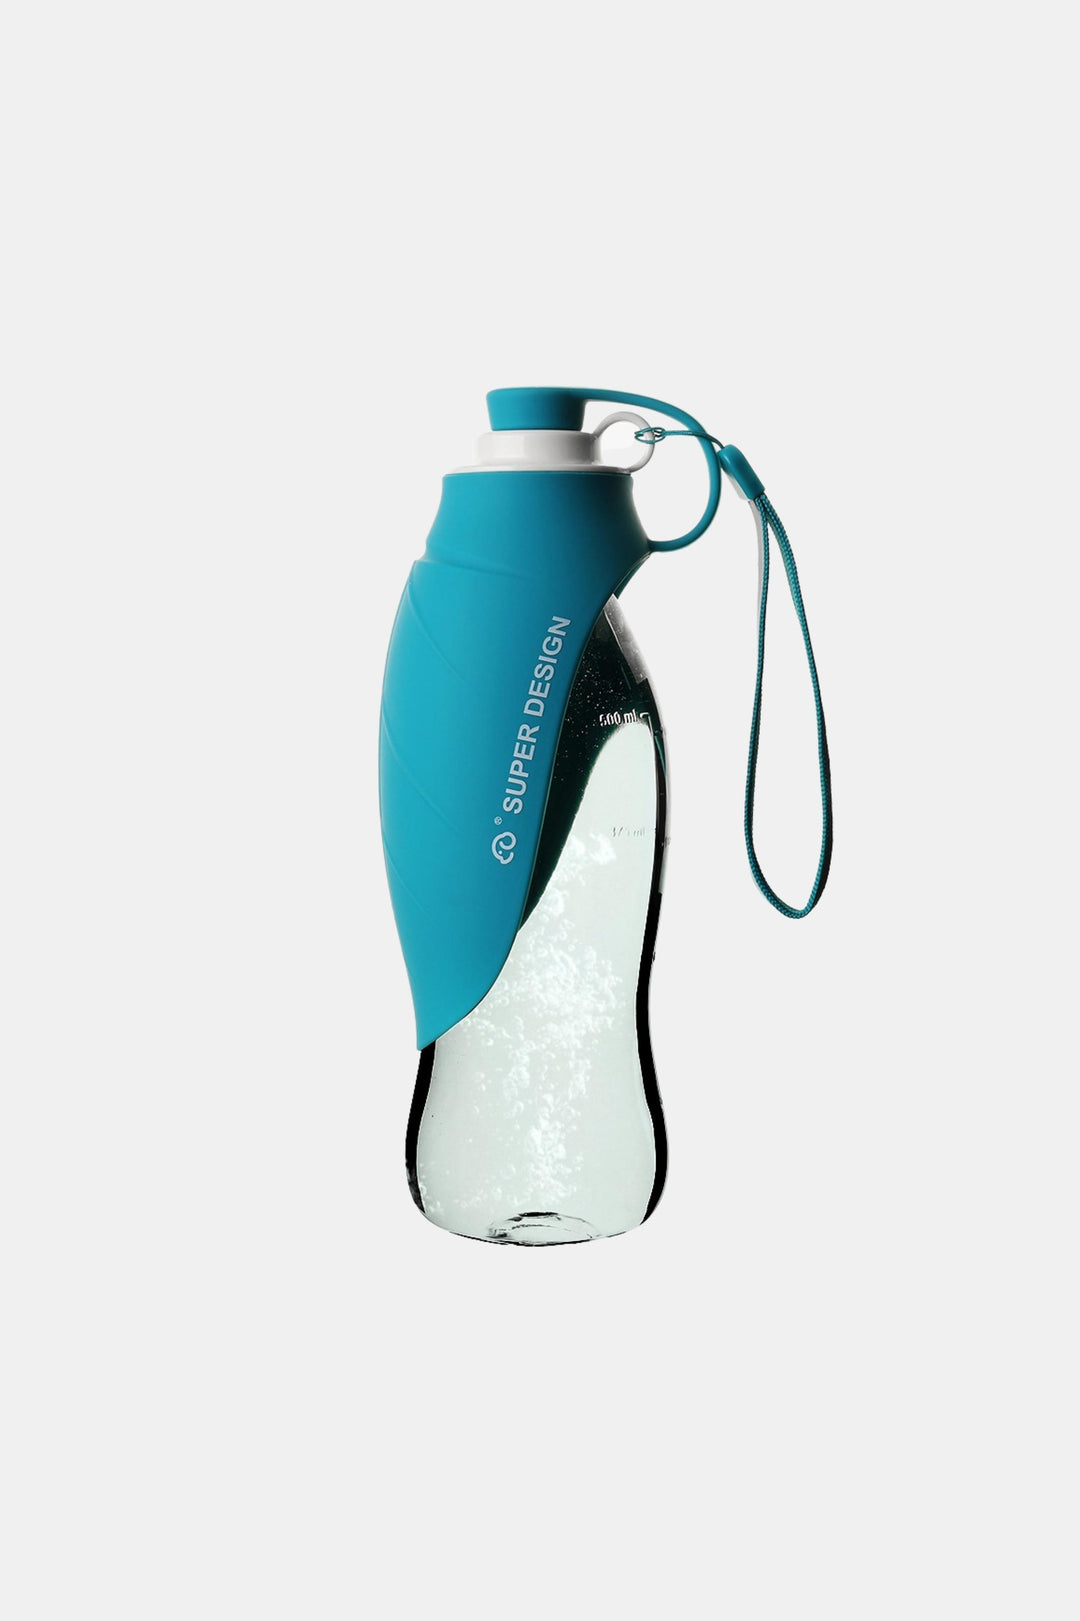 Water Bottle For Dogs